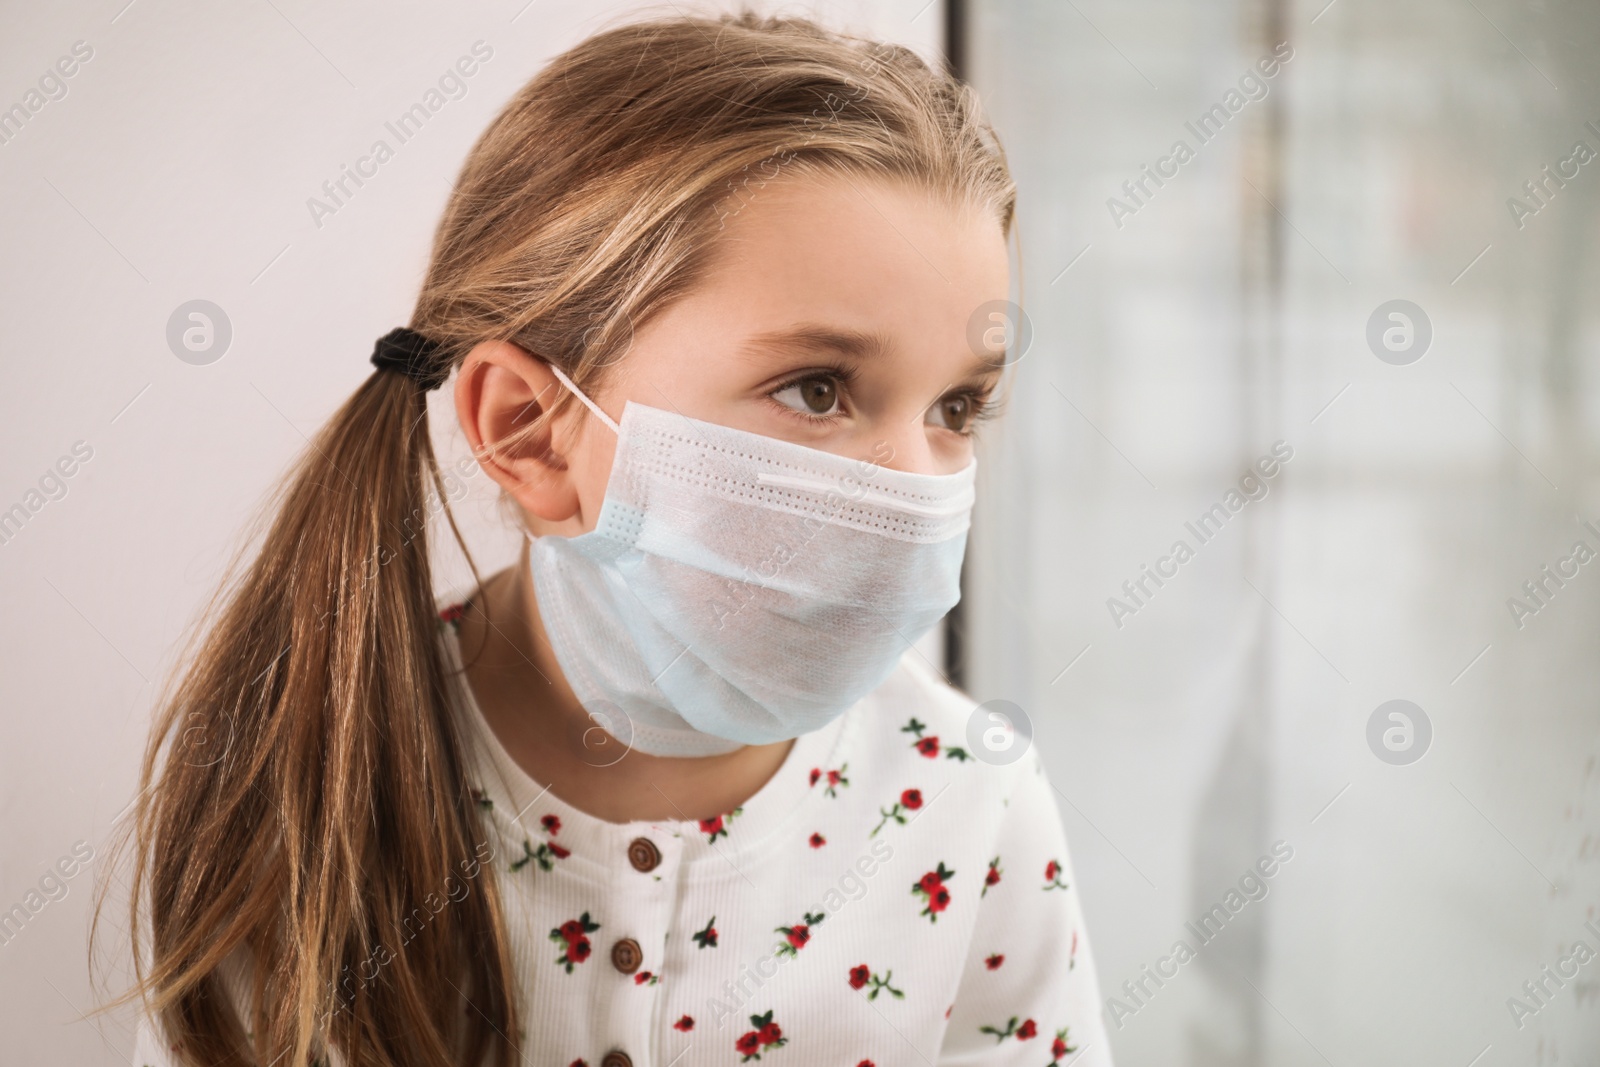 Photo of Sad little girl in protective mask looking out of window indoors. Staying at home during coronavirus pandemic